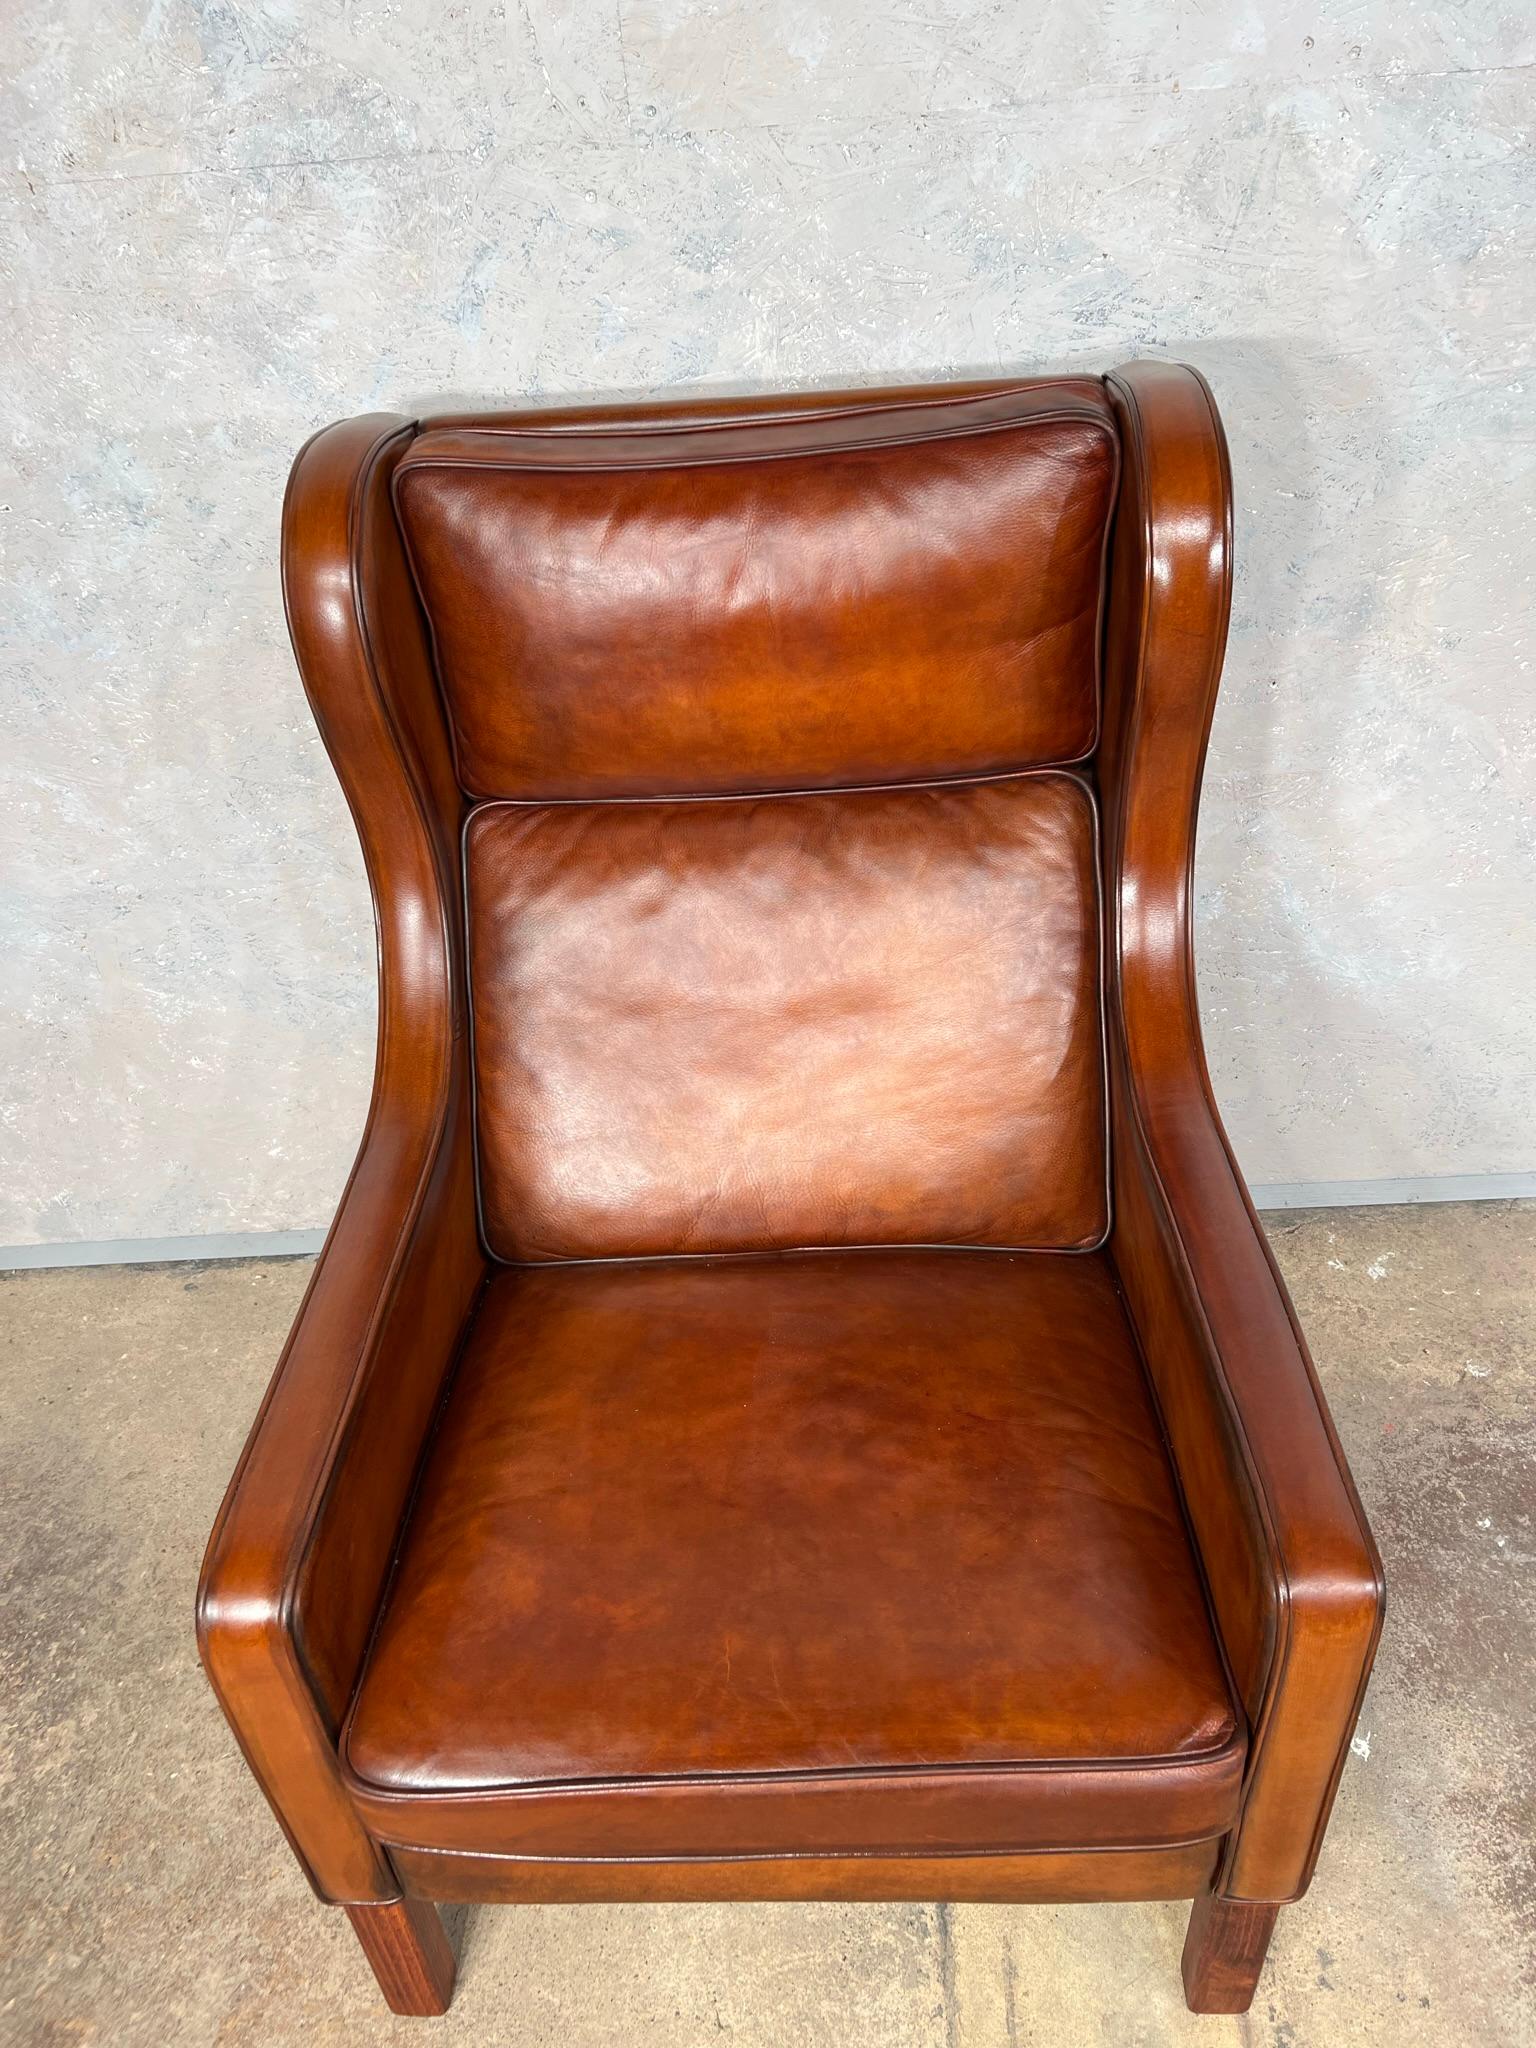 20th Century Elegant Vintage Danish 70s Leather Chair Wingback Armchair #654 For Sale